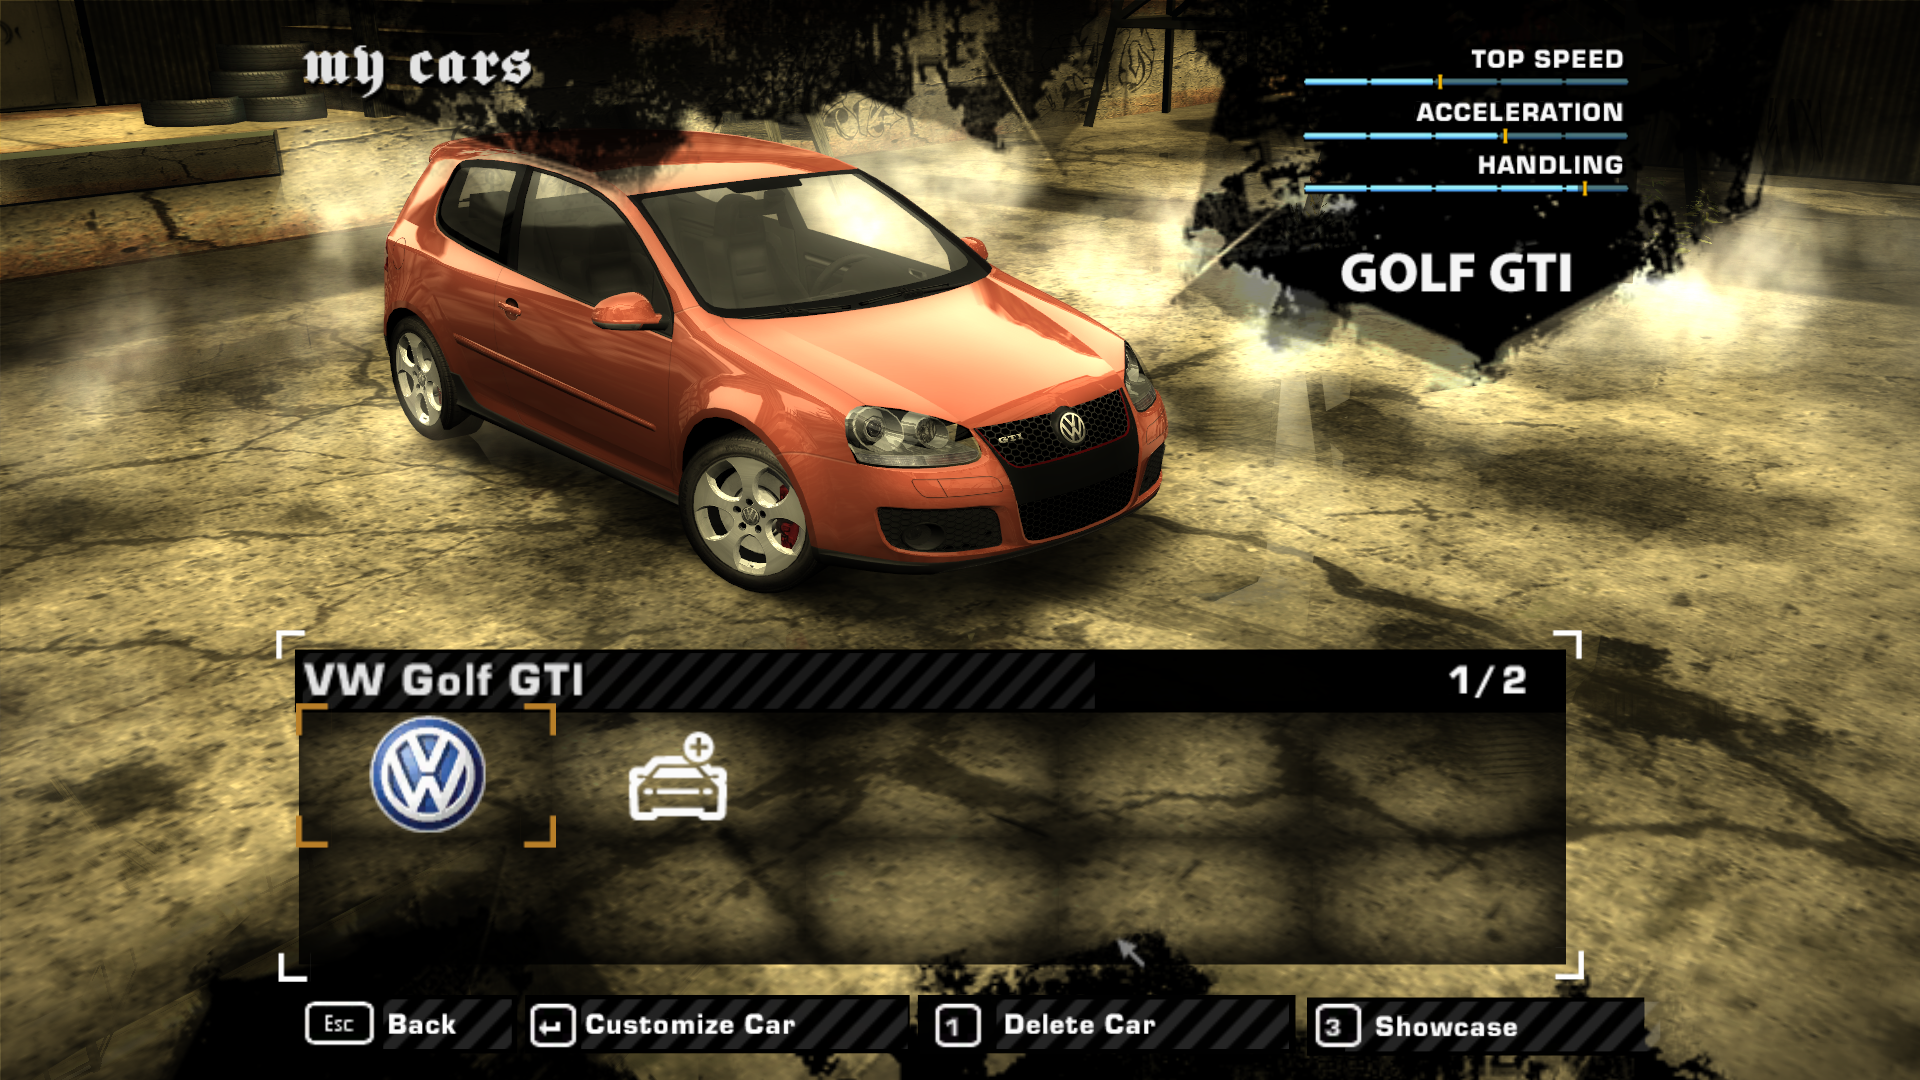 Need For Speed Most Wanted Volkswagen Golf GTI - Performance Upgrade